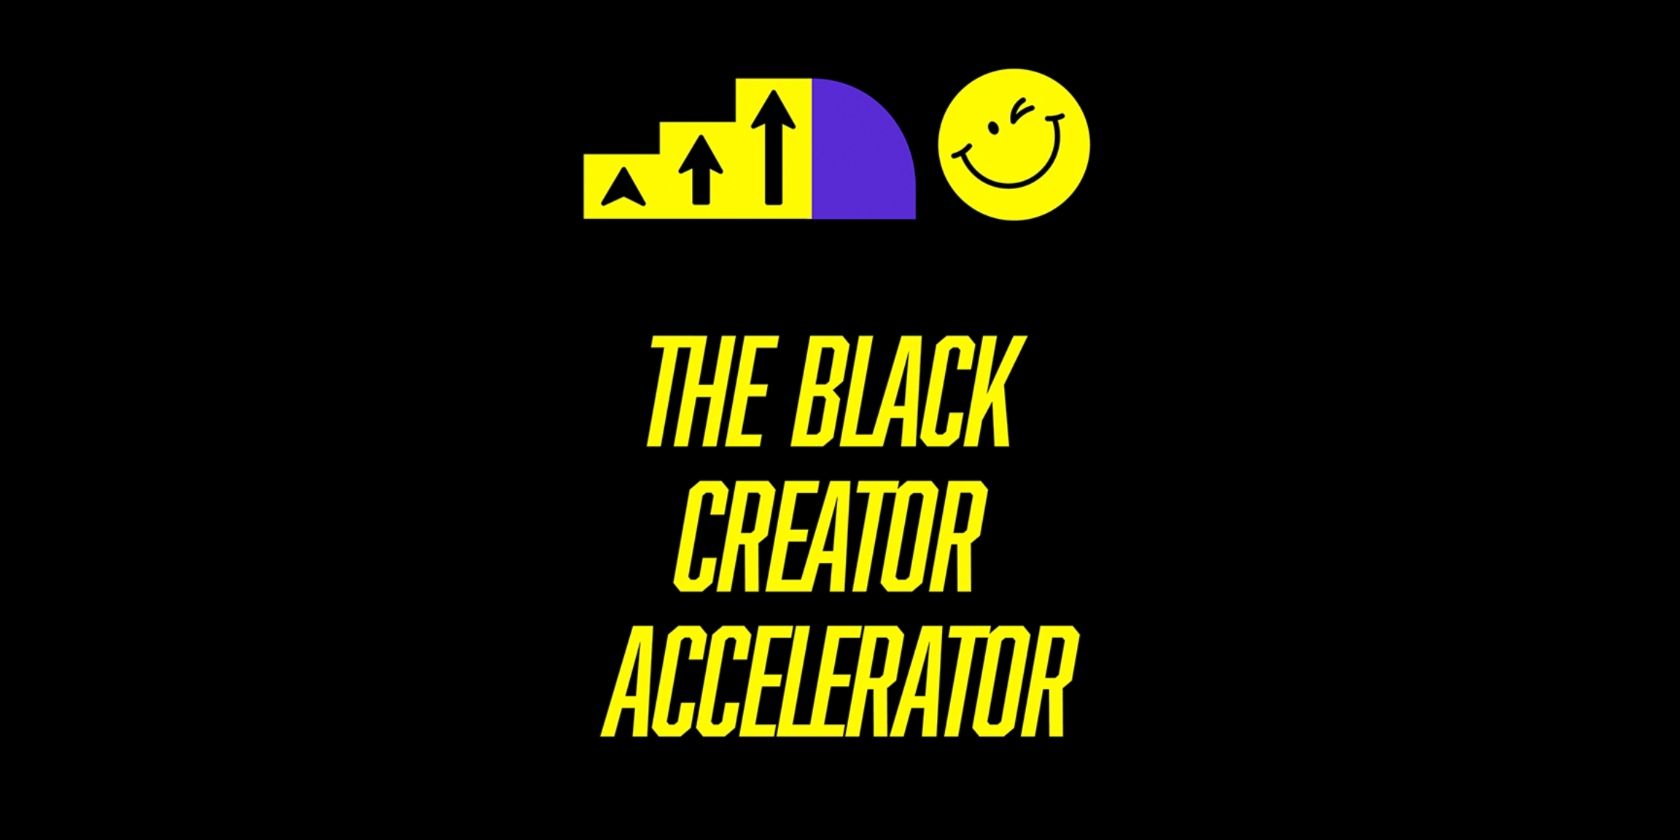 How to Apply to Join Snap's Black Creator Accelerator Program